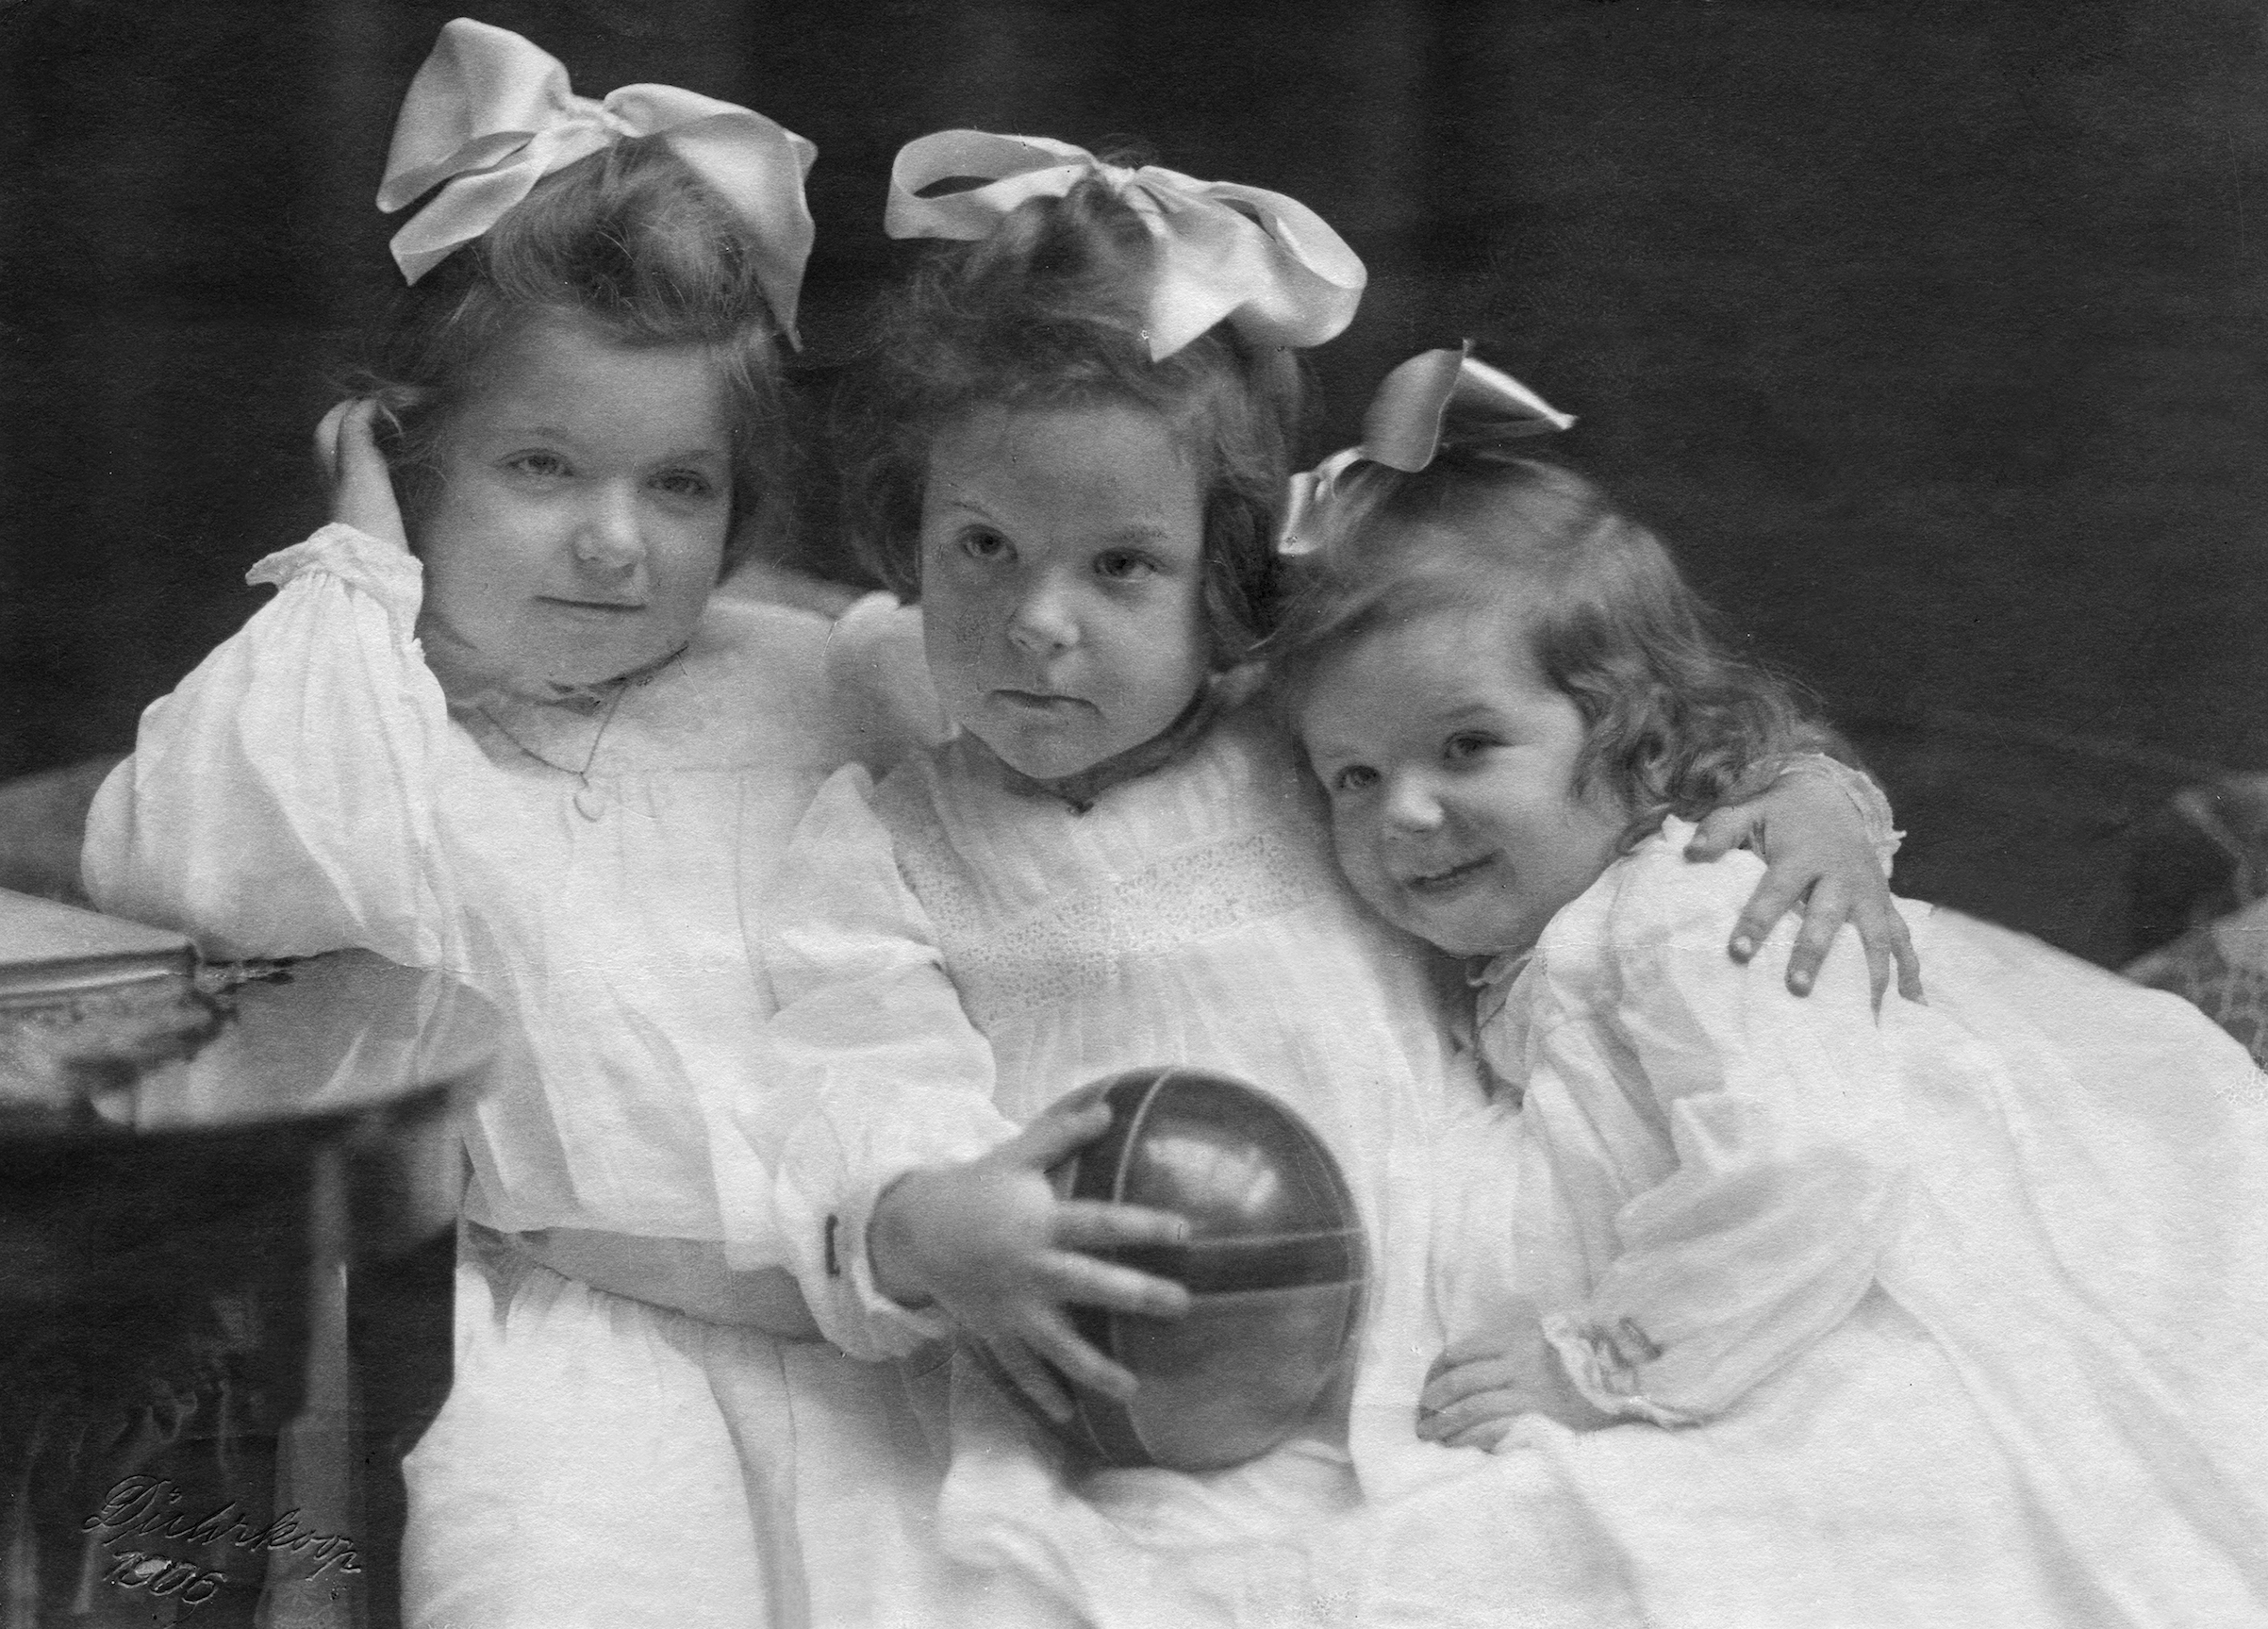 Three sisters with hair bows, 1906. (Rudolph Duehrkoop—ullstein bild/Getty Images)